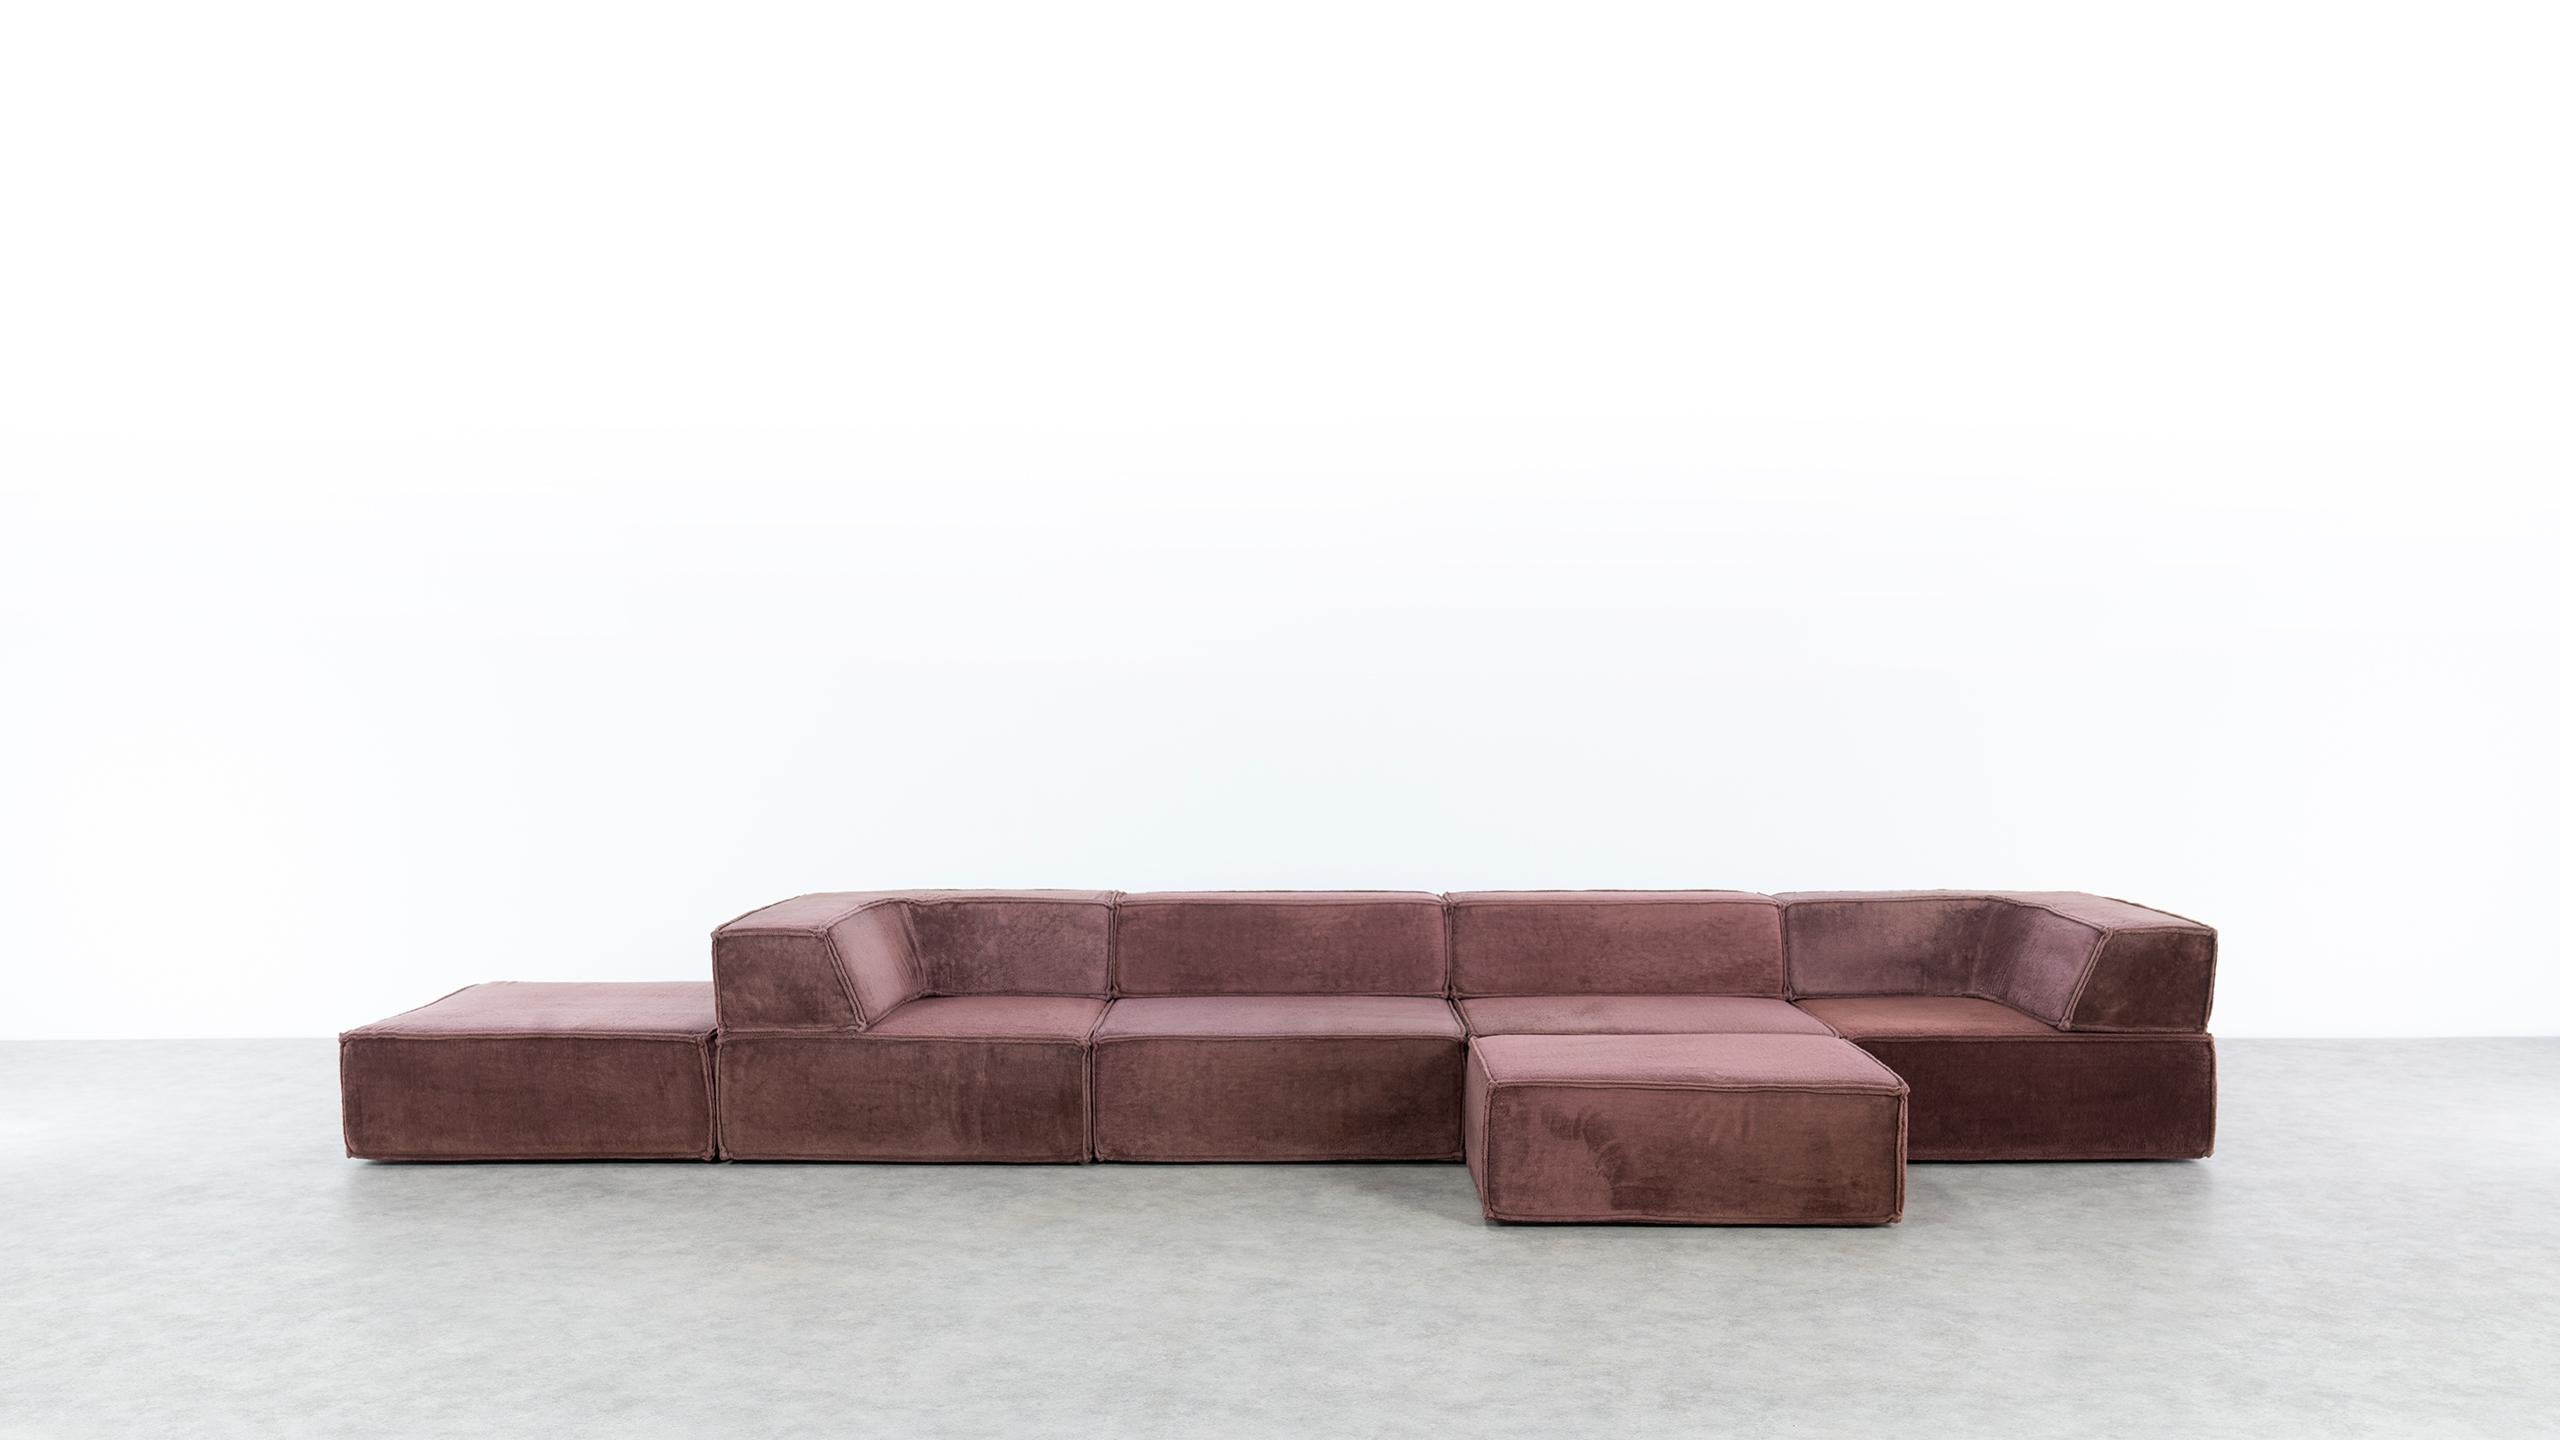 German COR Trio Modular Sofa, Giant Landscape in Brown, 1972 by Team Form AG, Swiss